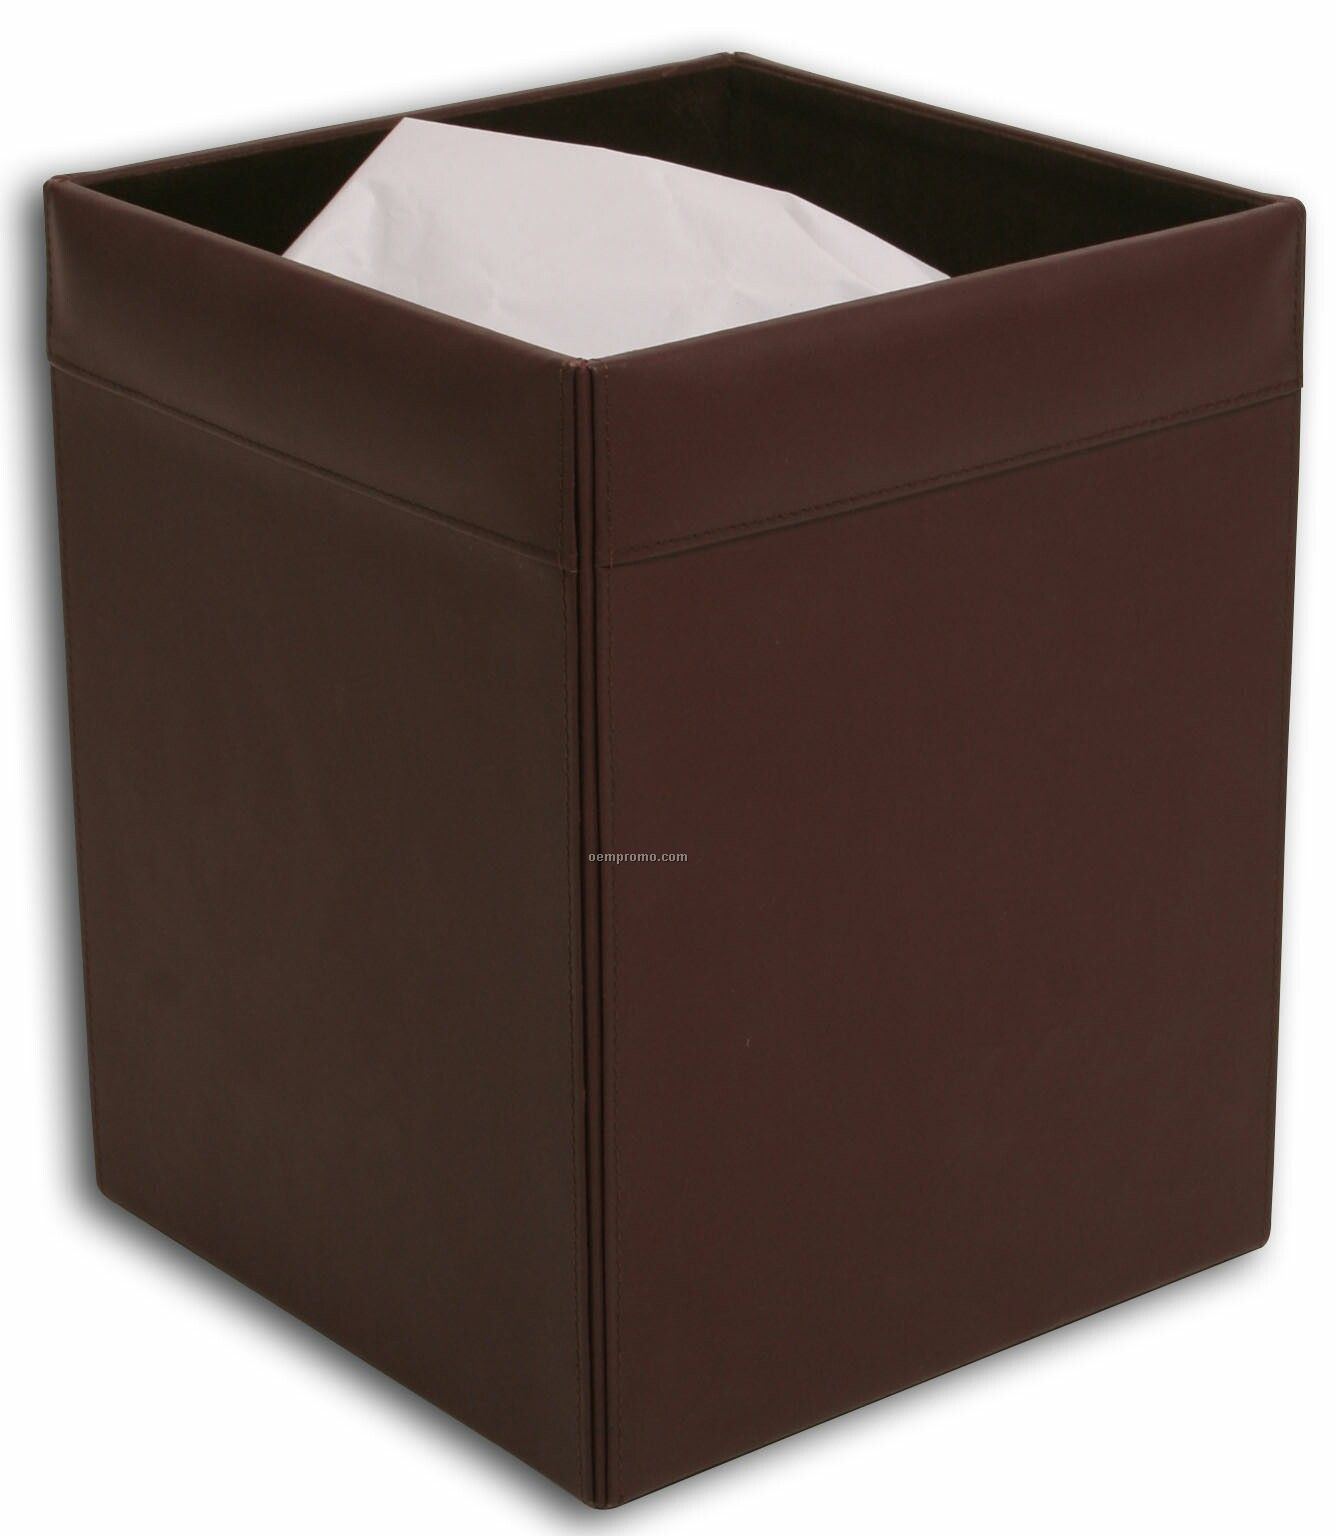 Chocolate Brown Classic Leather Square Waste Basket